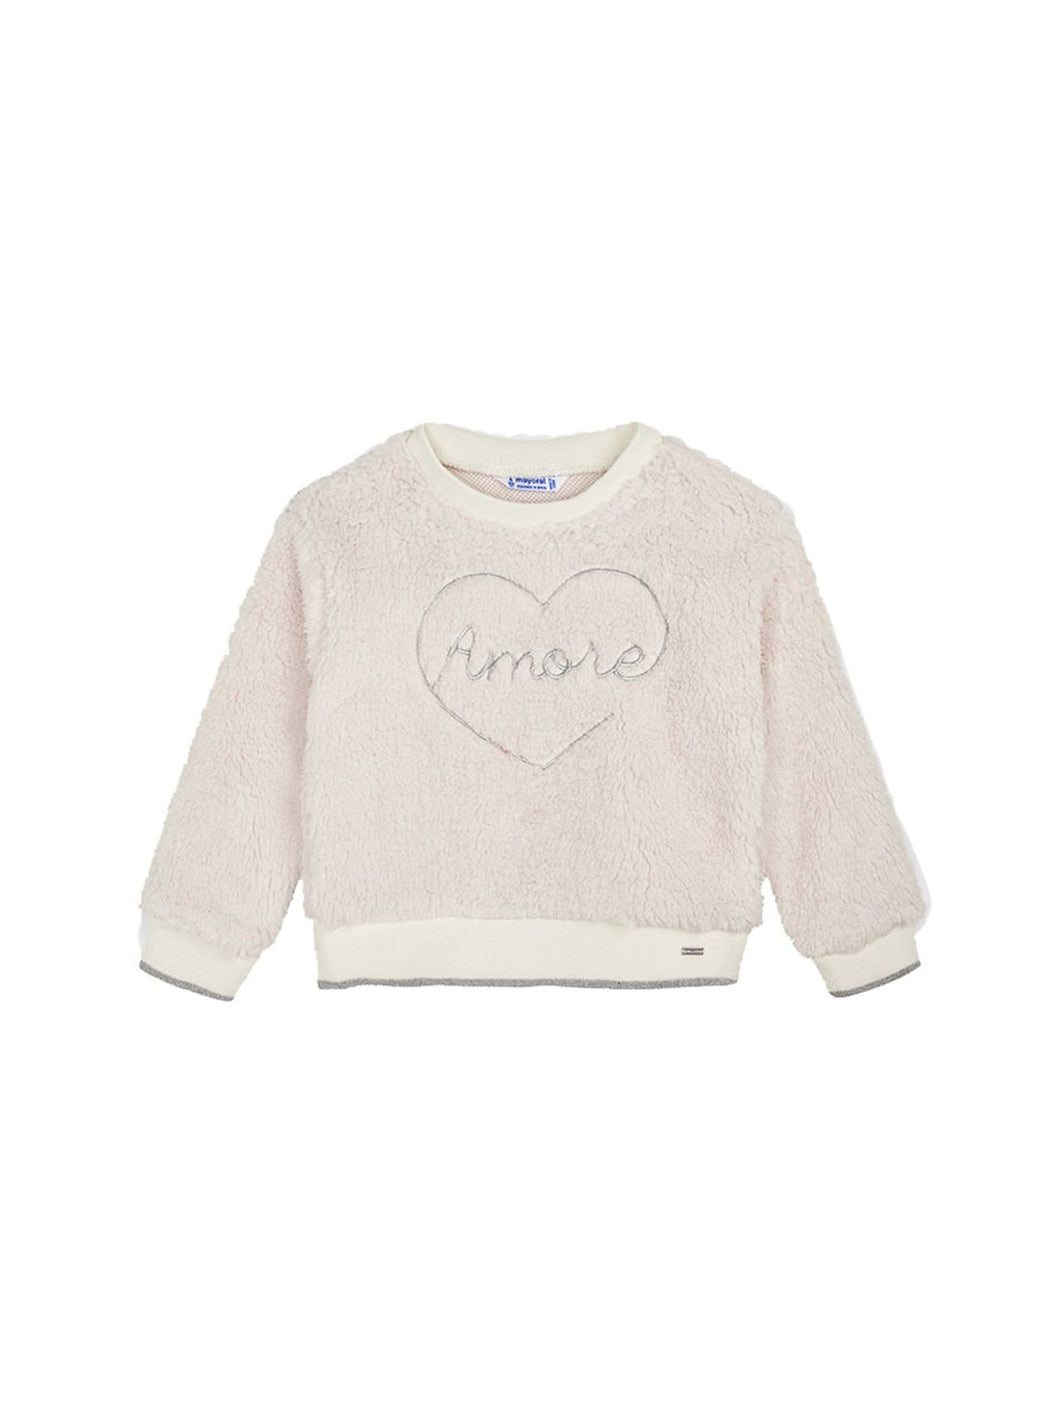 Beige Amore Knit Sweater